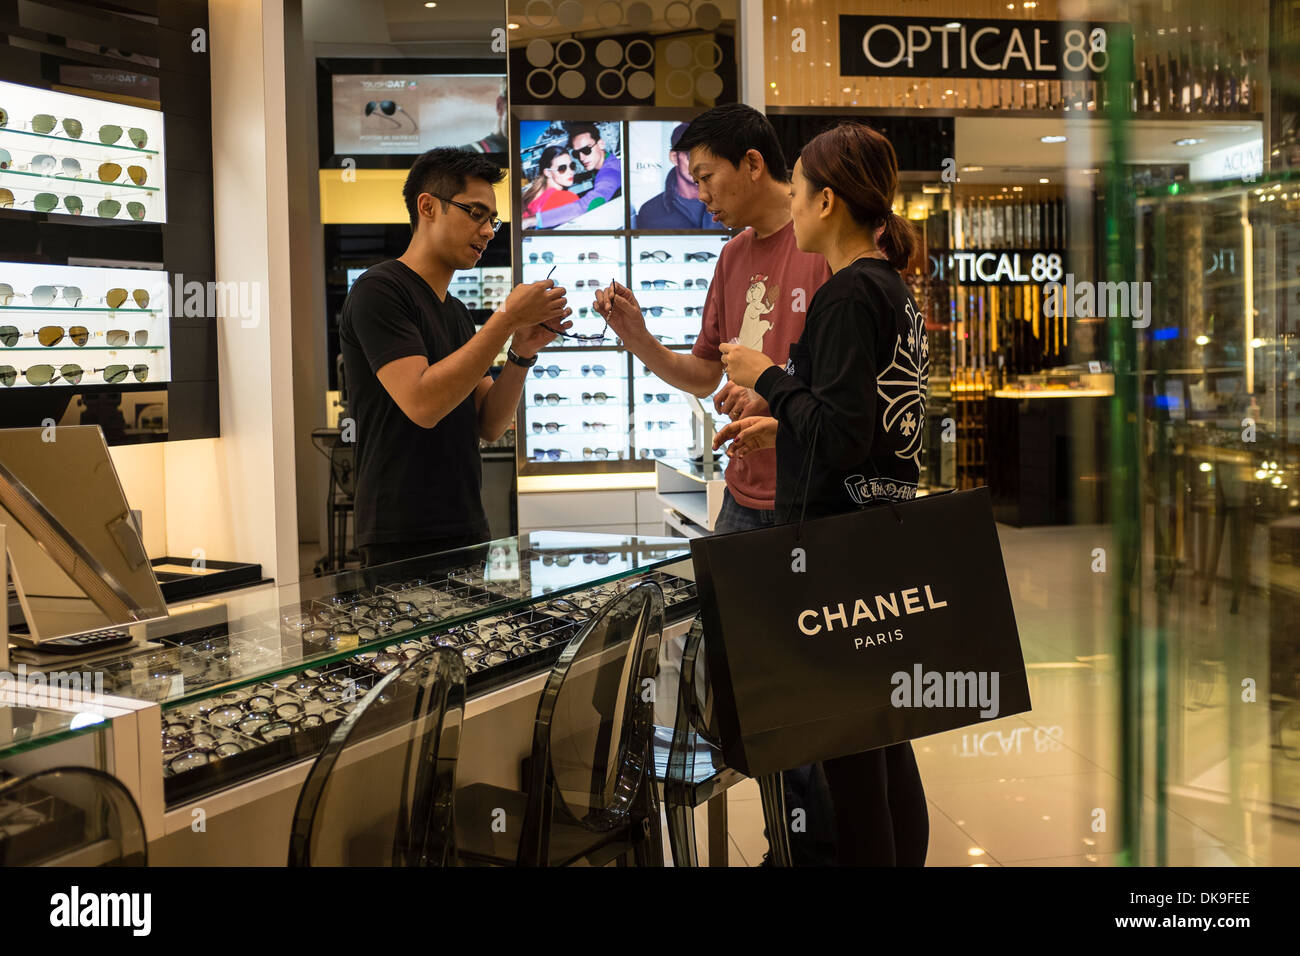 Chanel outlet, Suria KLCC, Stock Video